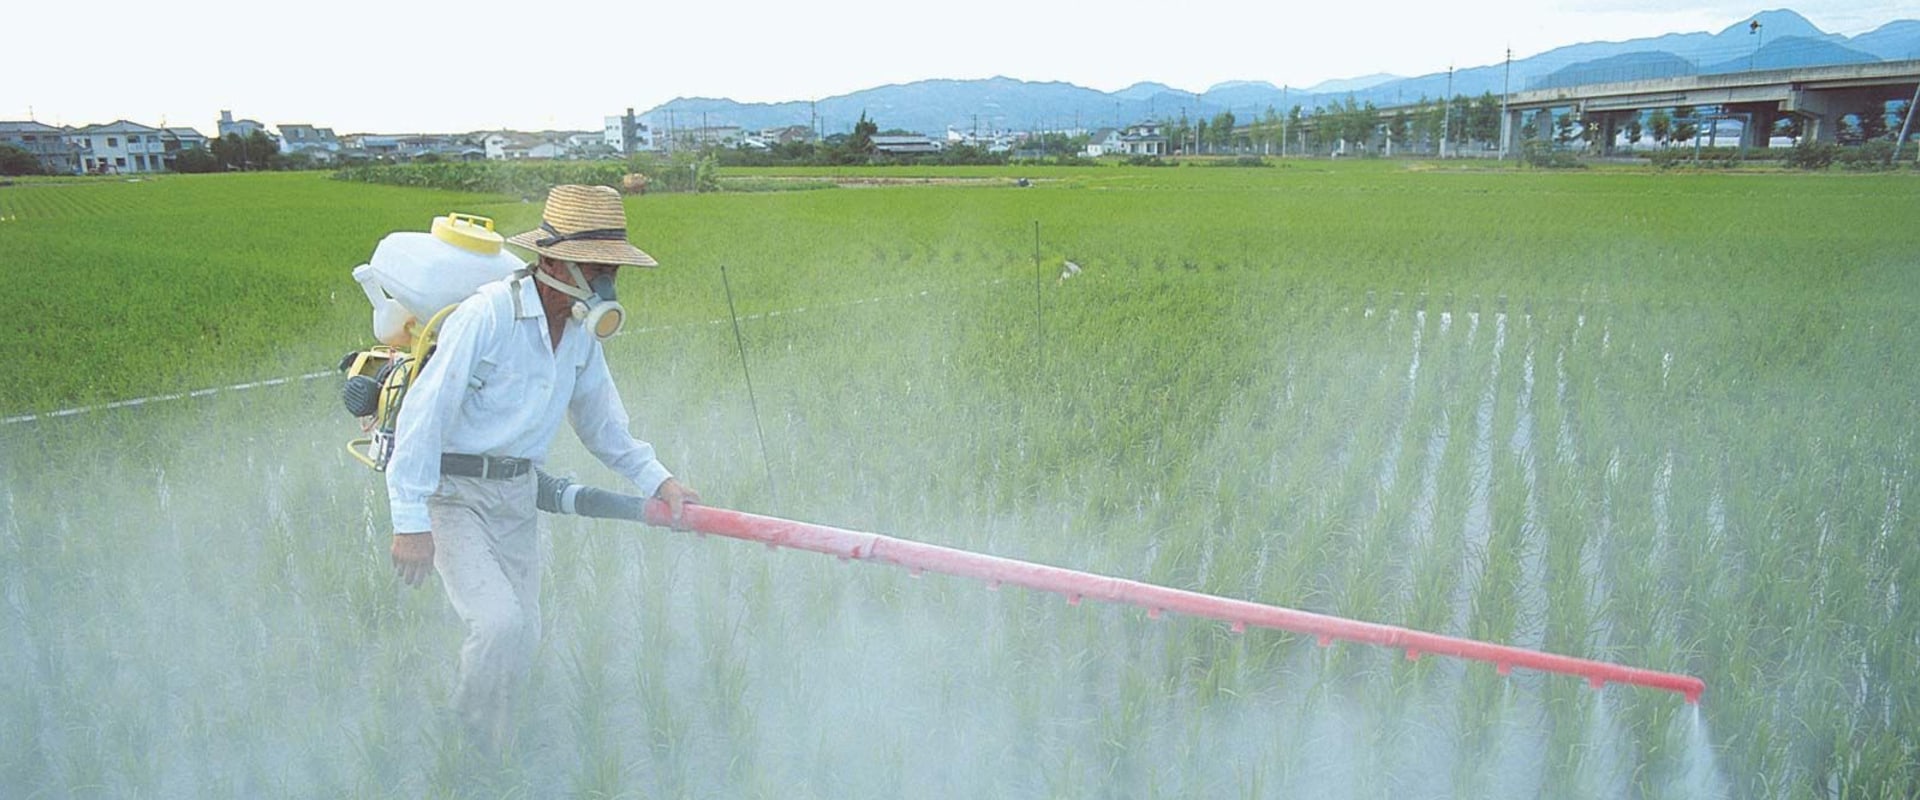 What are some disadvantages of pesticides?